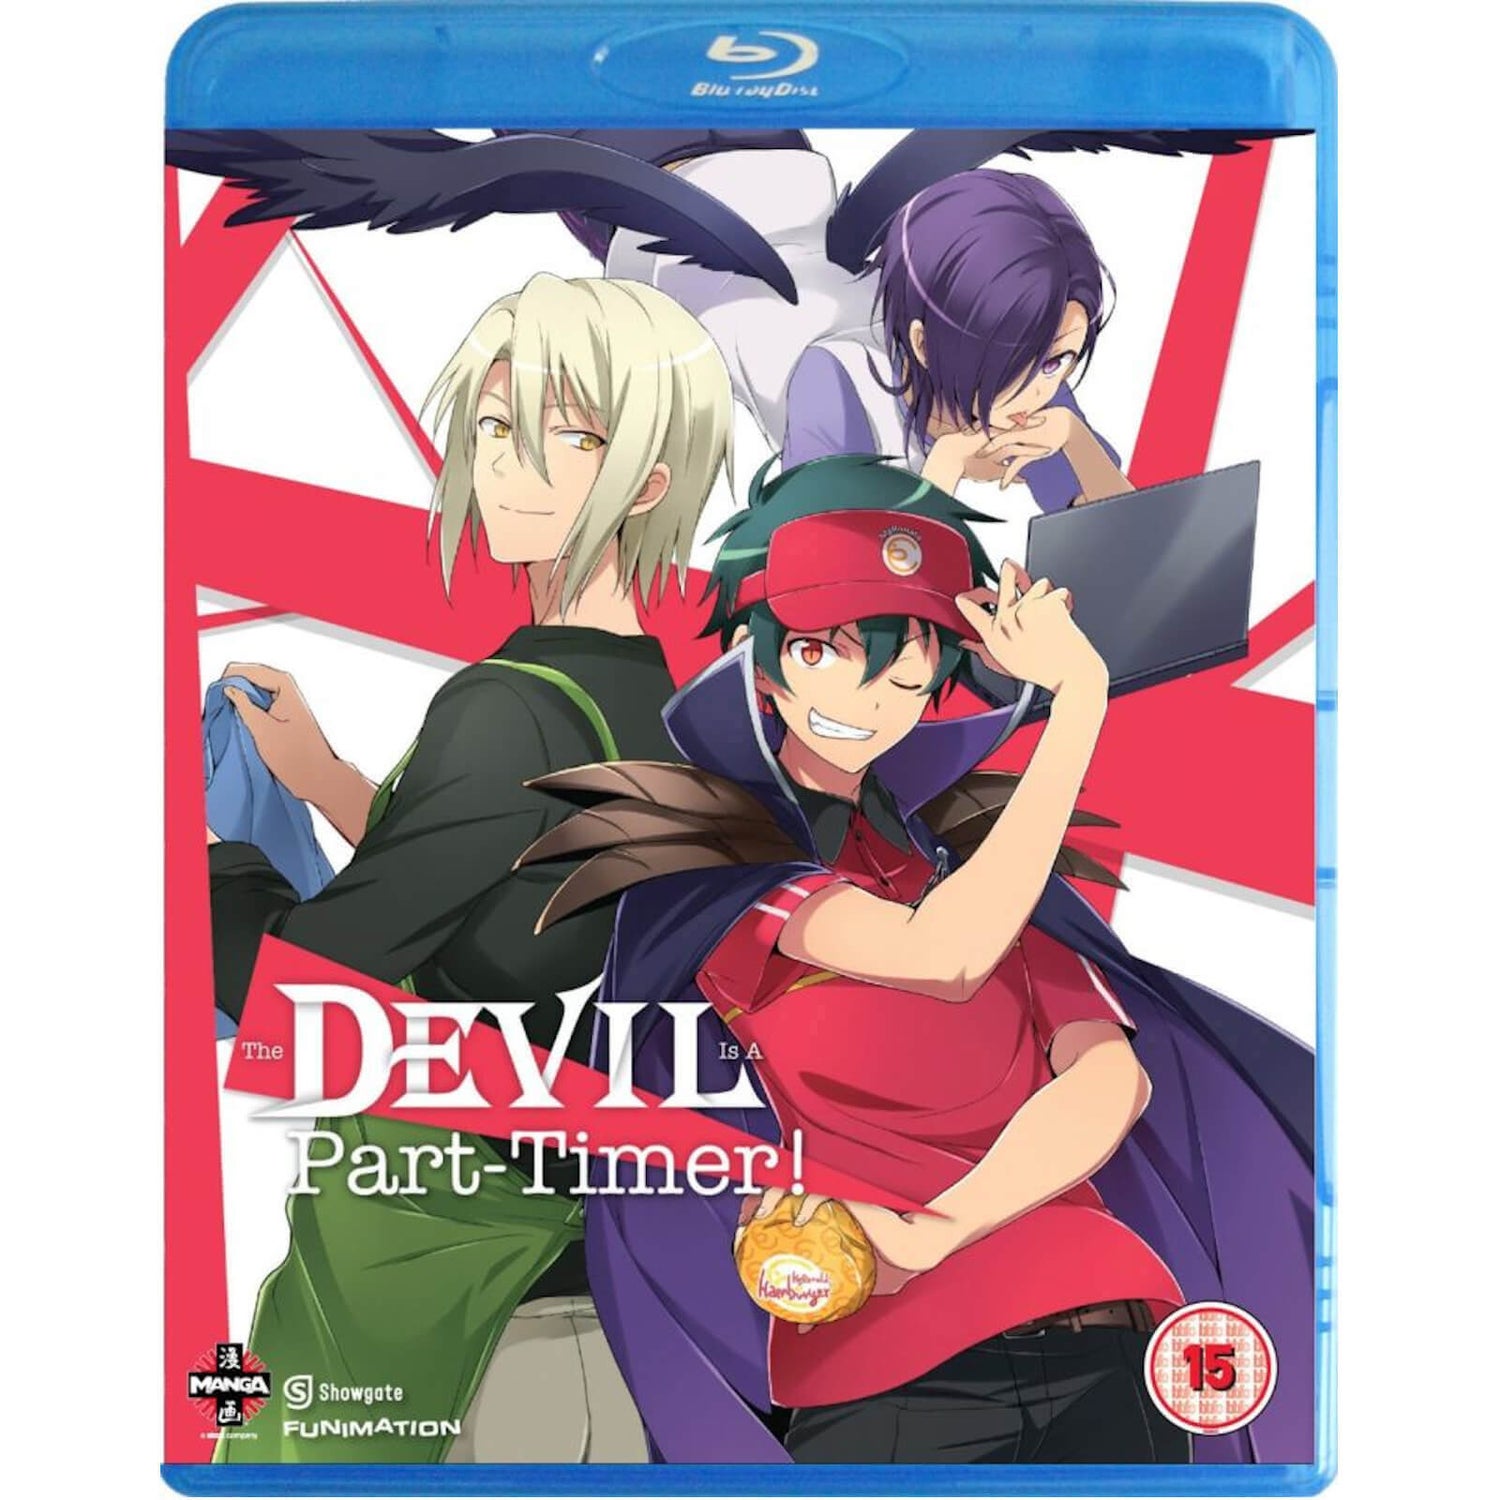 The Devil is a Part-Timer! (はたらく魔王さま！)